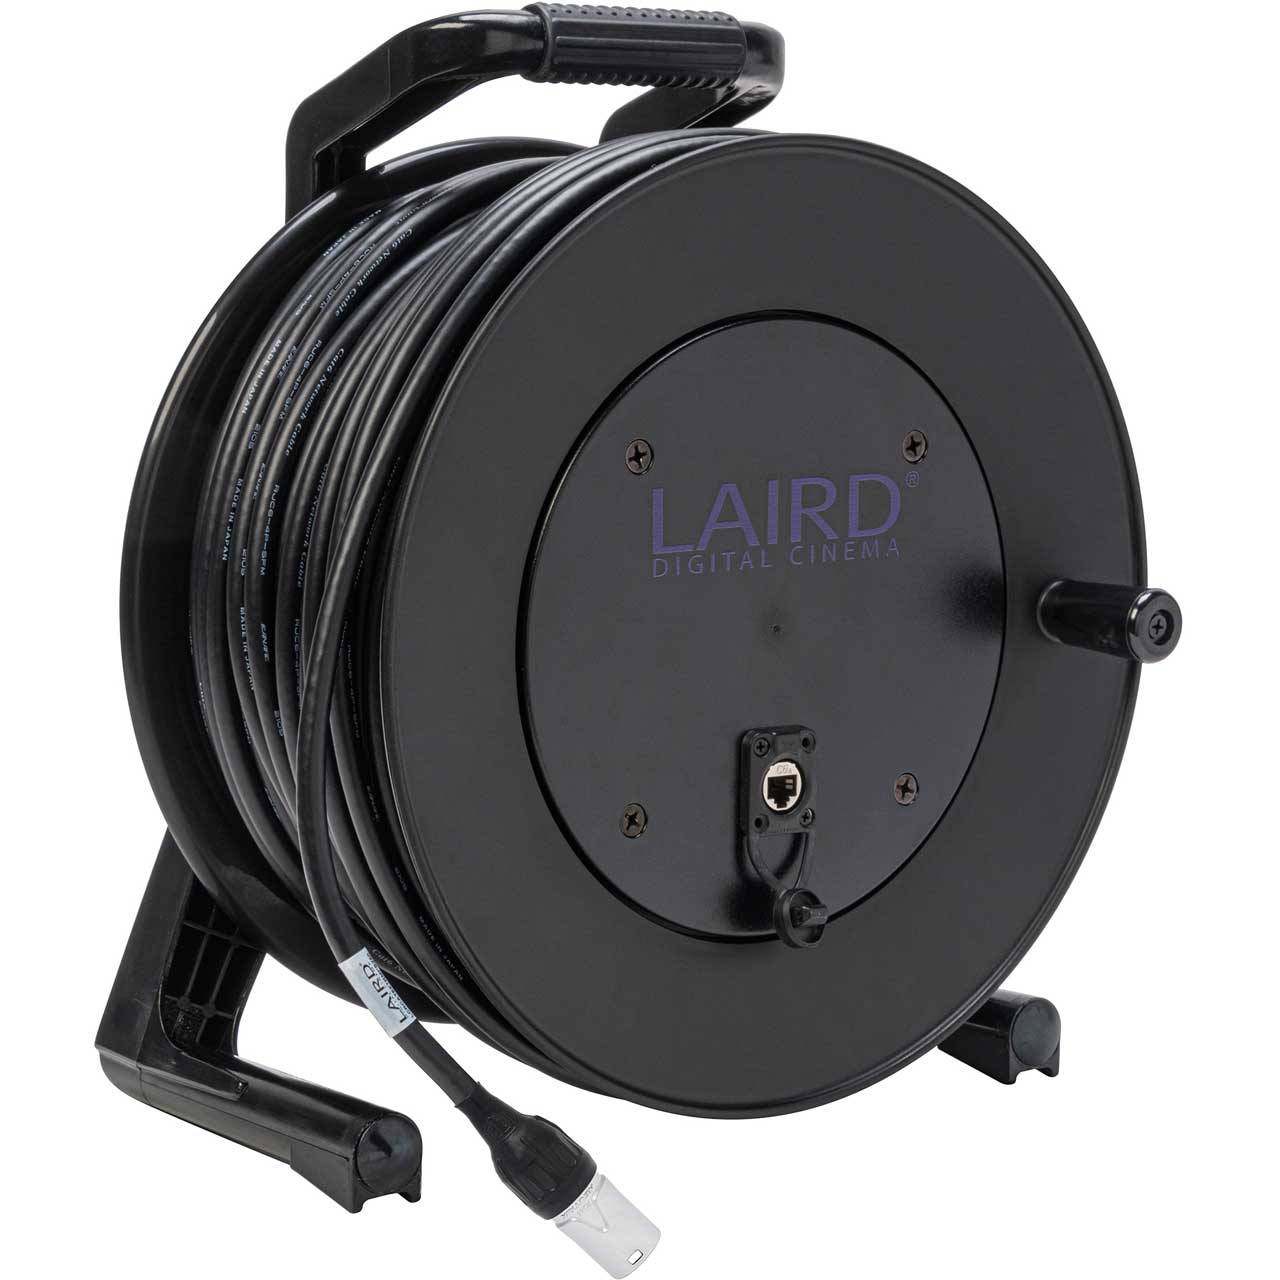 LAIRD LCR-CAT6A-EC-150 Belden 10GX CAT6A Ethernet Cable with etherCON  Connectors on Cable and Reel Hub- 150 Foot